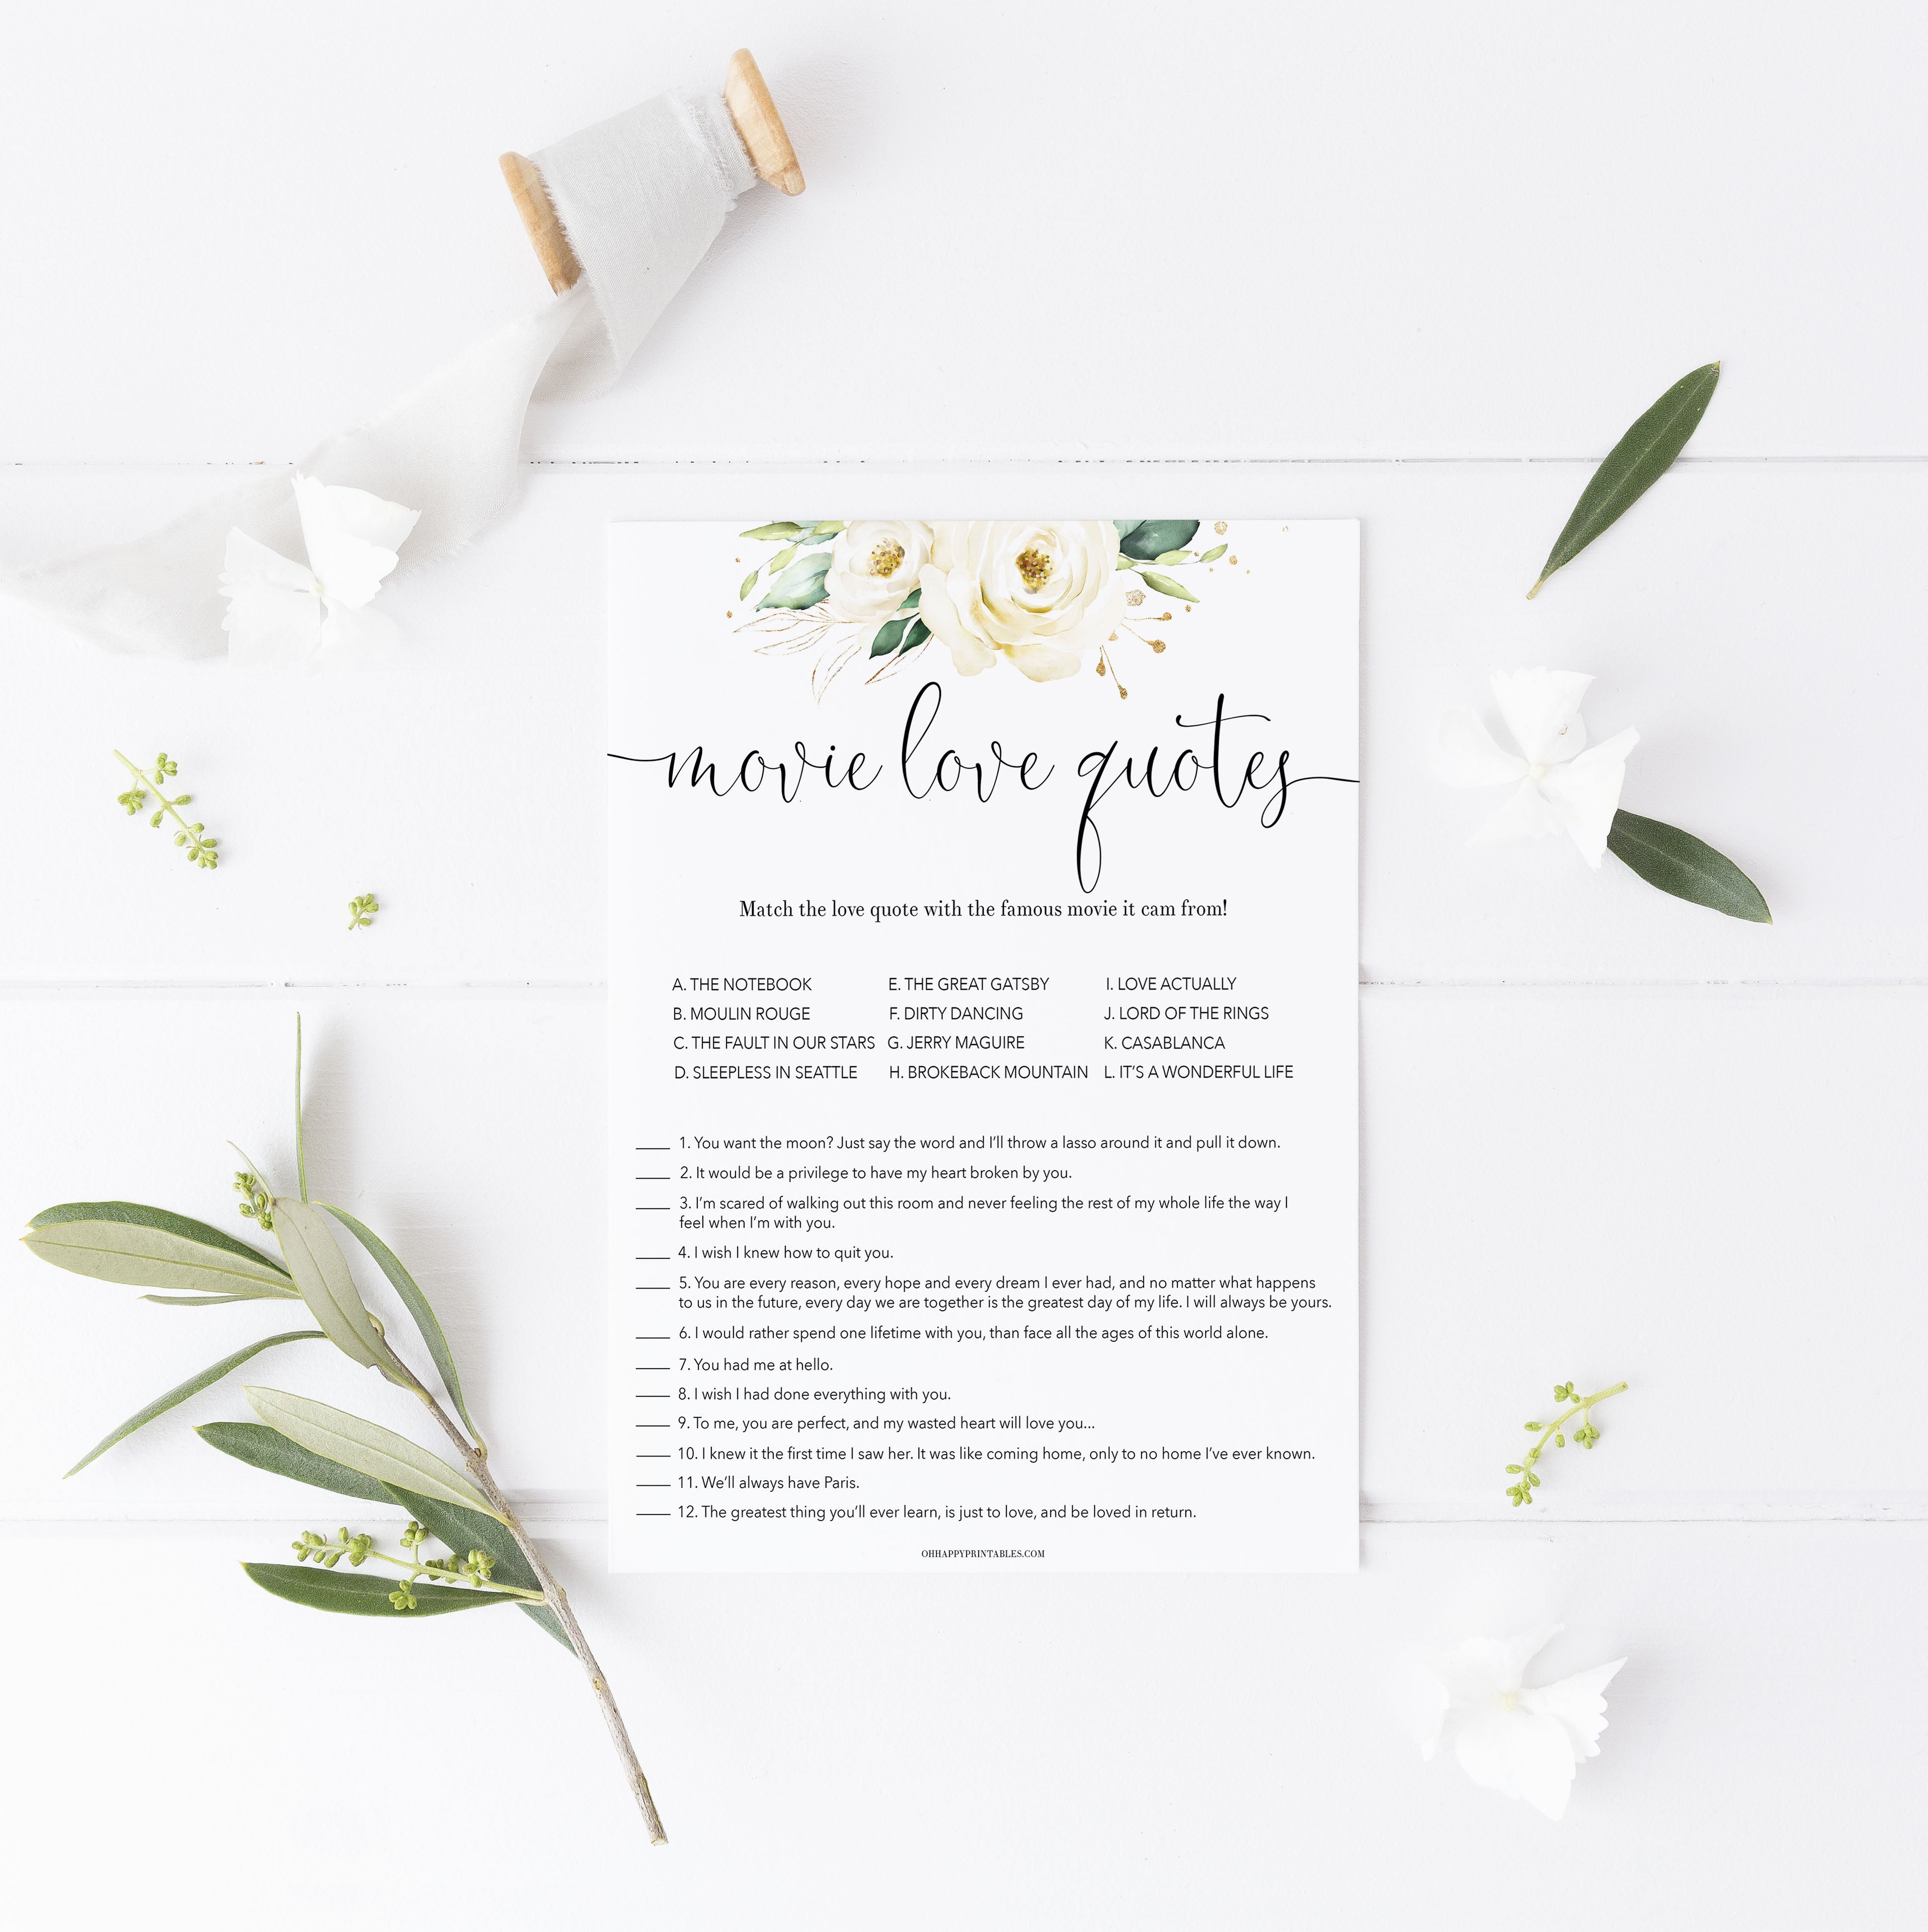 match the movie love quote game, Printable bridal shower games, floral bridal shower, floral bridal shower games, fun bridal shower games, bridal shower game ideas, floral bridal shower